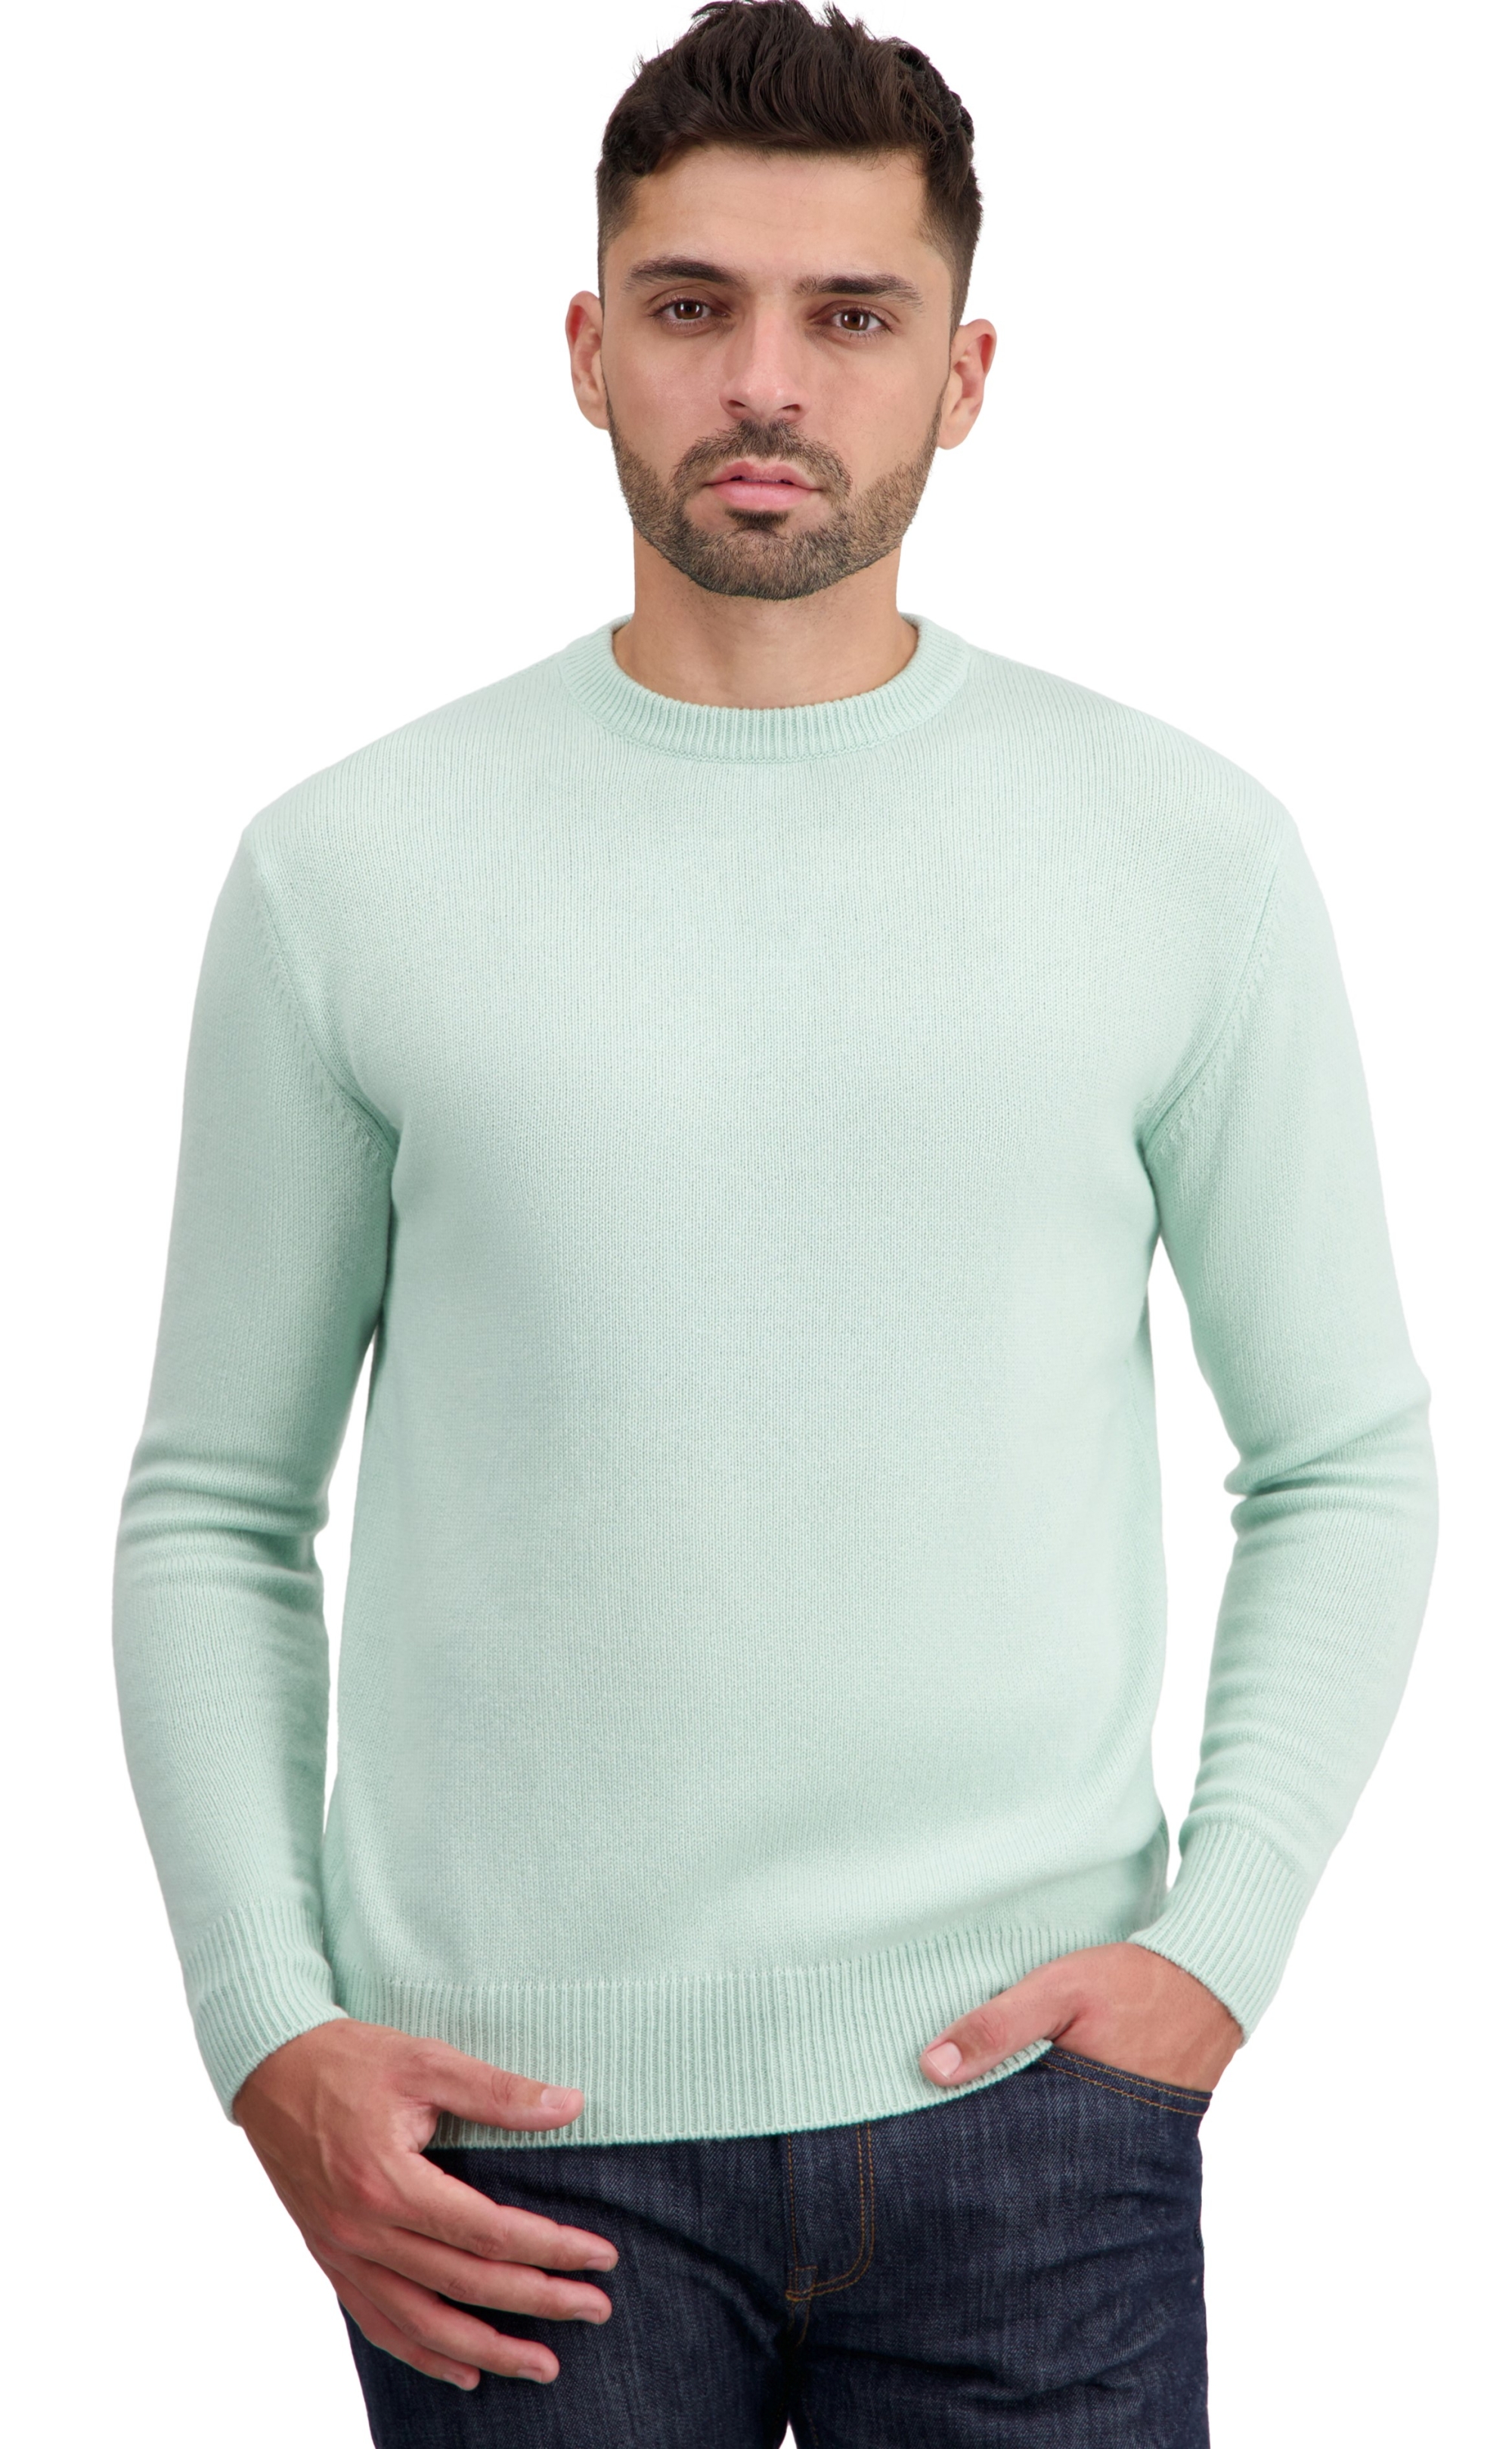 Cashmere men chunky sweater touraine first embrace s